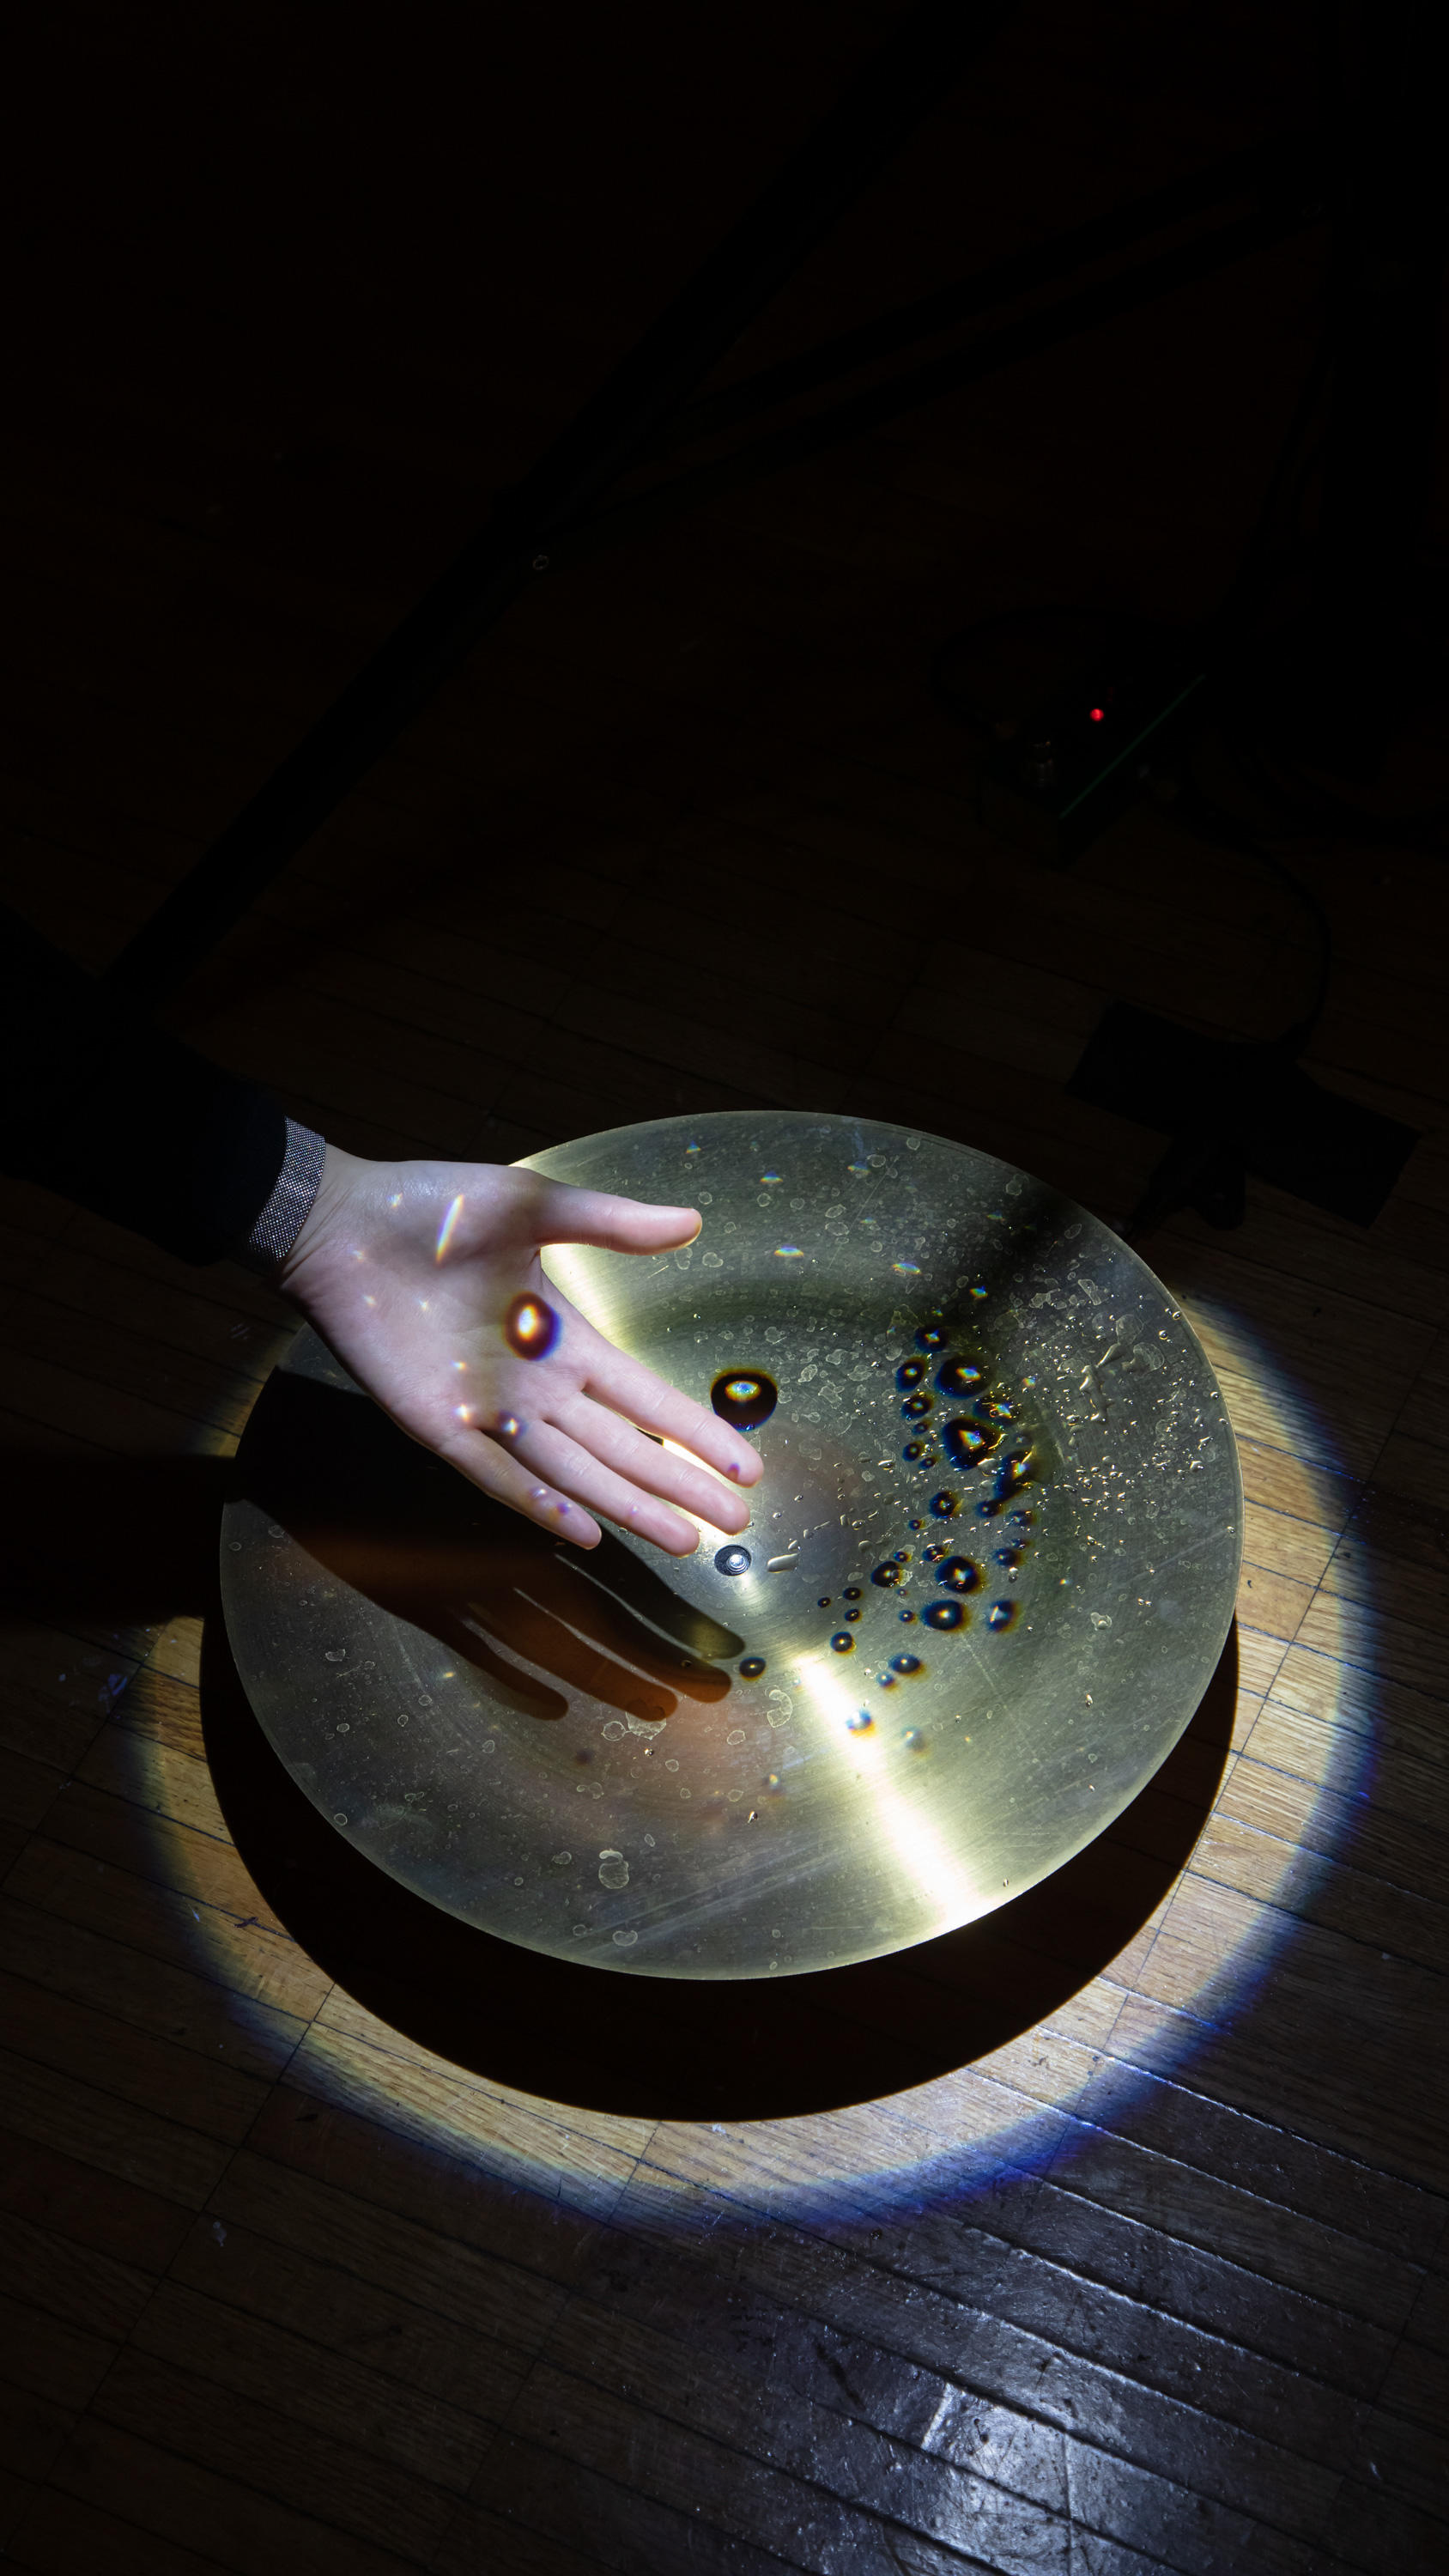 Hand in front of cymbal with water drops projected onto the surface